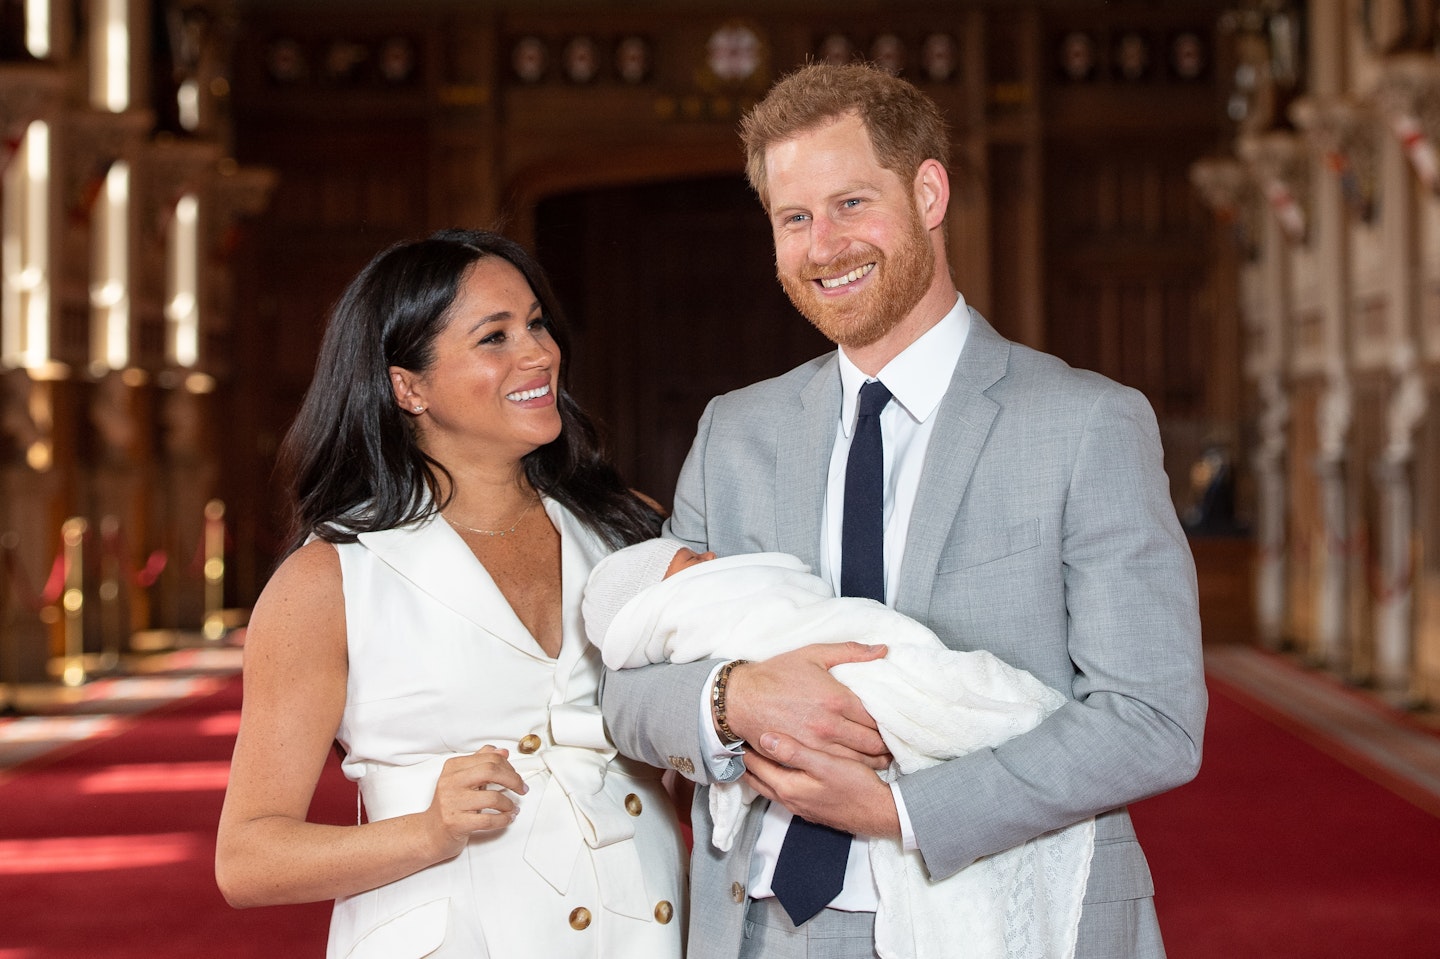 Meghan Markle and Prince Harry with their newborn son